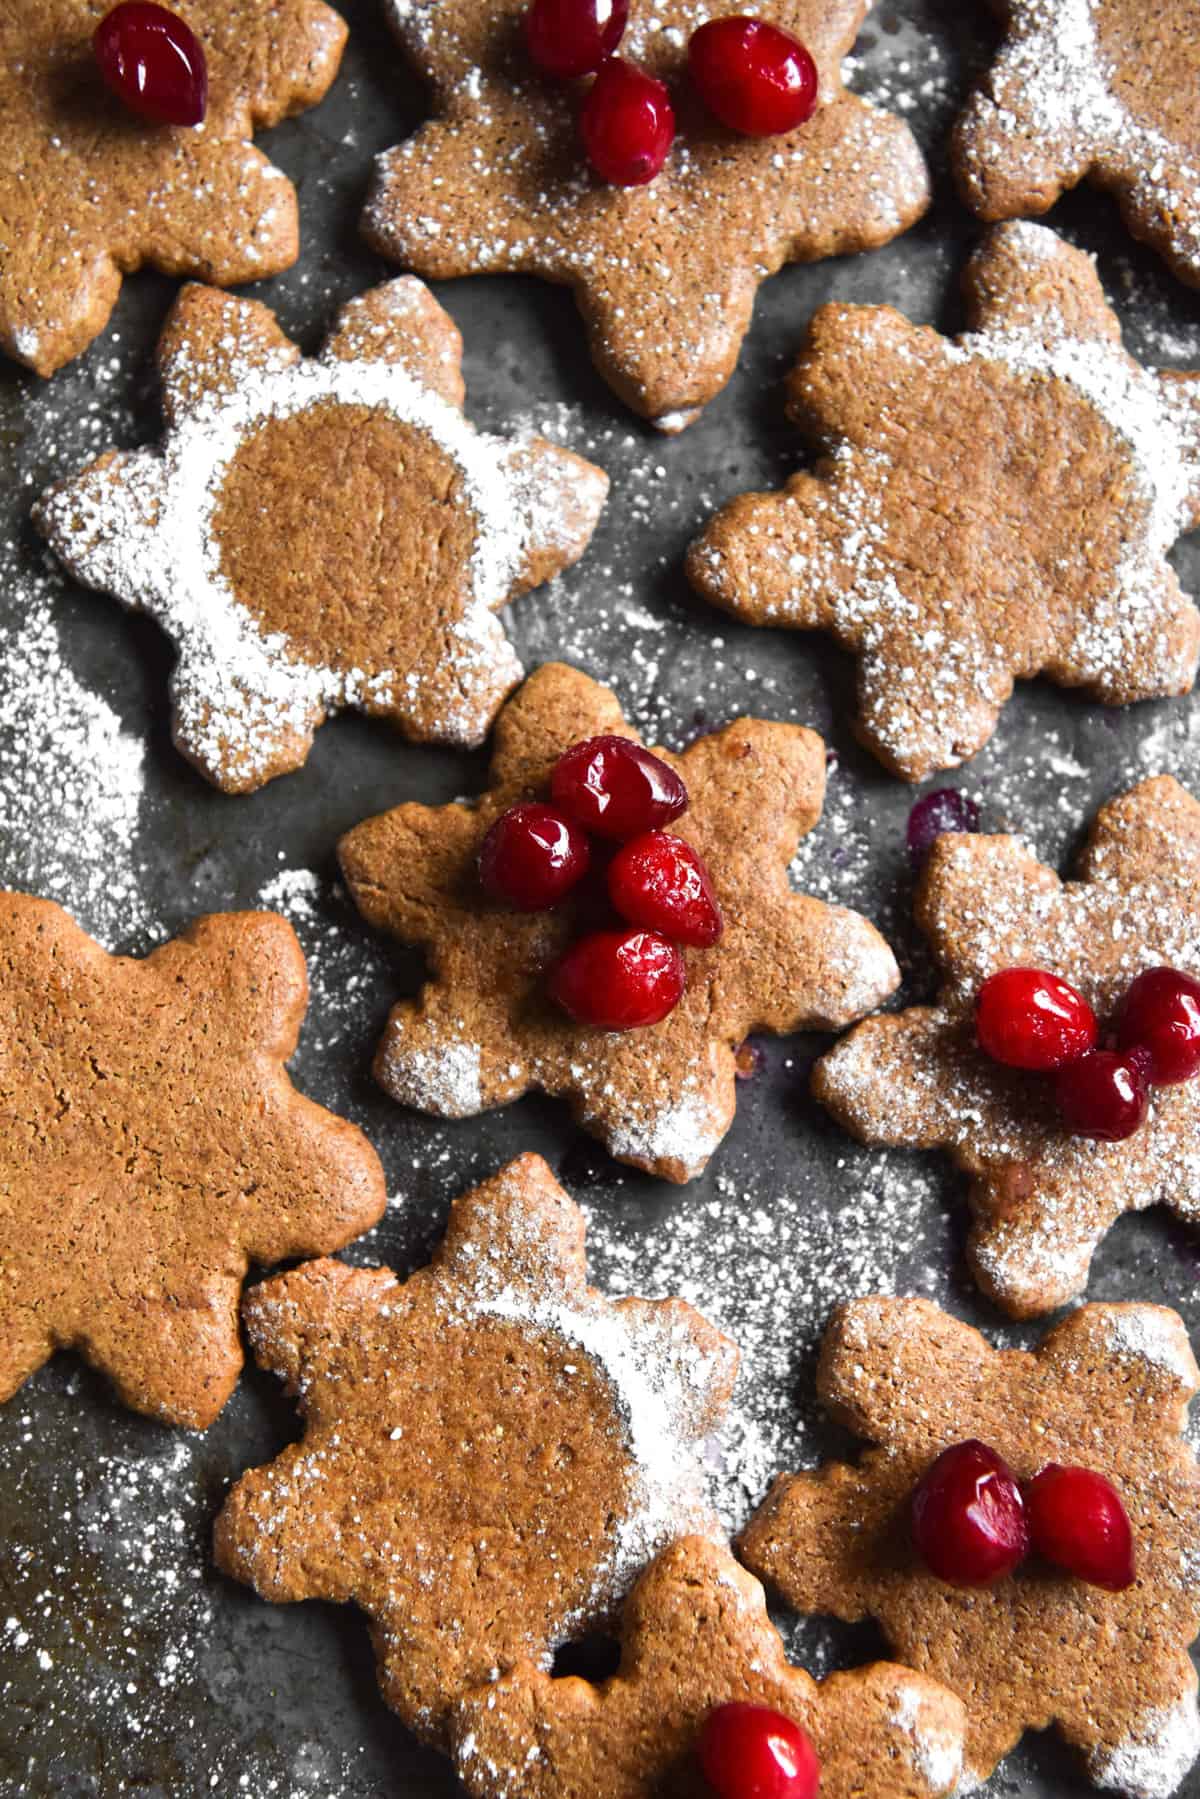 Grain free gingerbread arranged on a mottled blue steel backdrop. The gingerbread are cut out in various shapes and some are topped with a sprinkling of icing sugar or cranberries